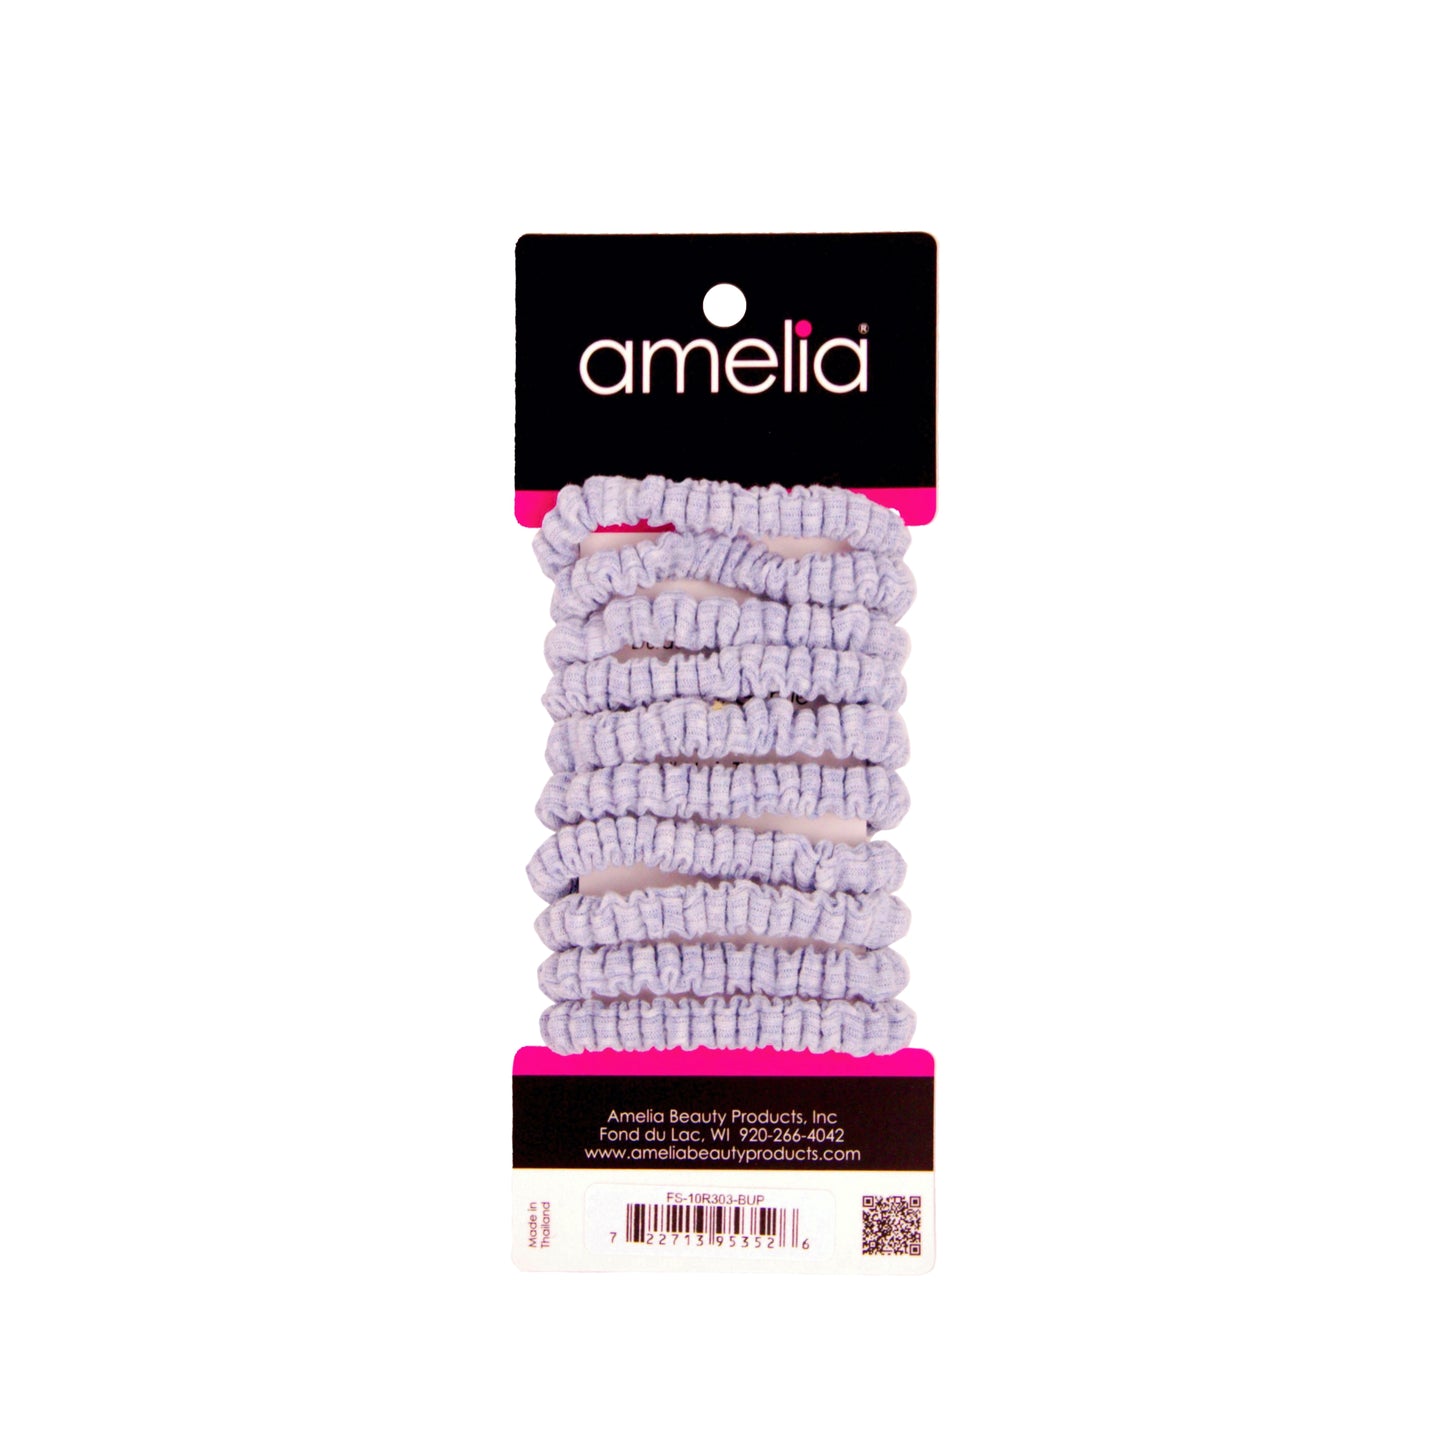 Amelia Beauty, Pastel Blue Ribbed Scrunchies, 2.25in Diameter, Gentle on Hair, Strong Hold, No Snag, No Dents or Creases. 10 Pack